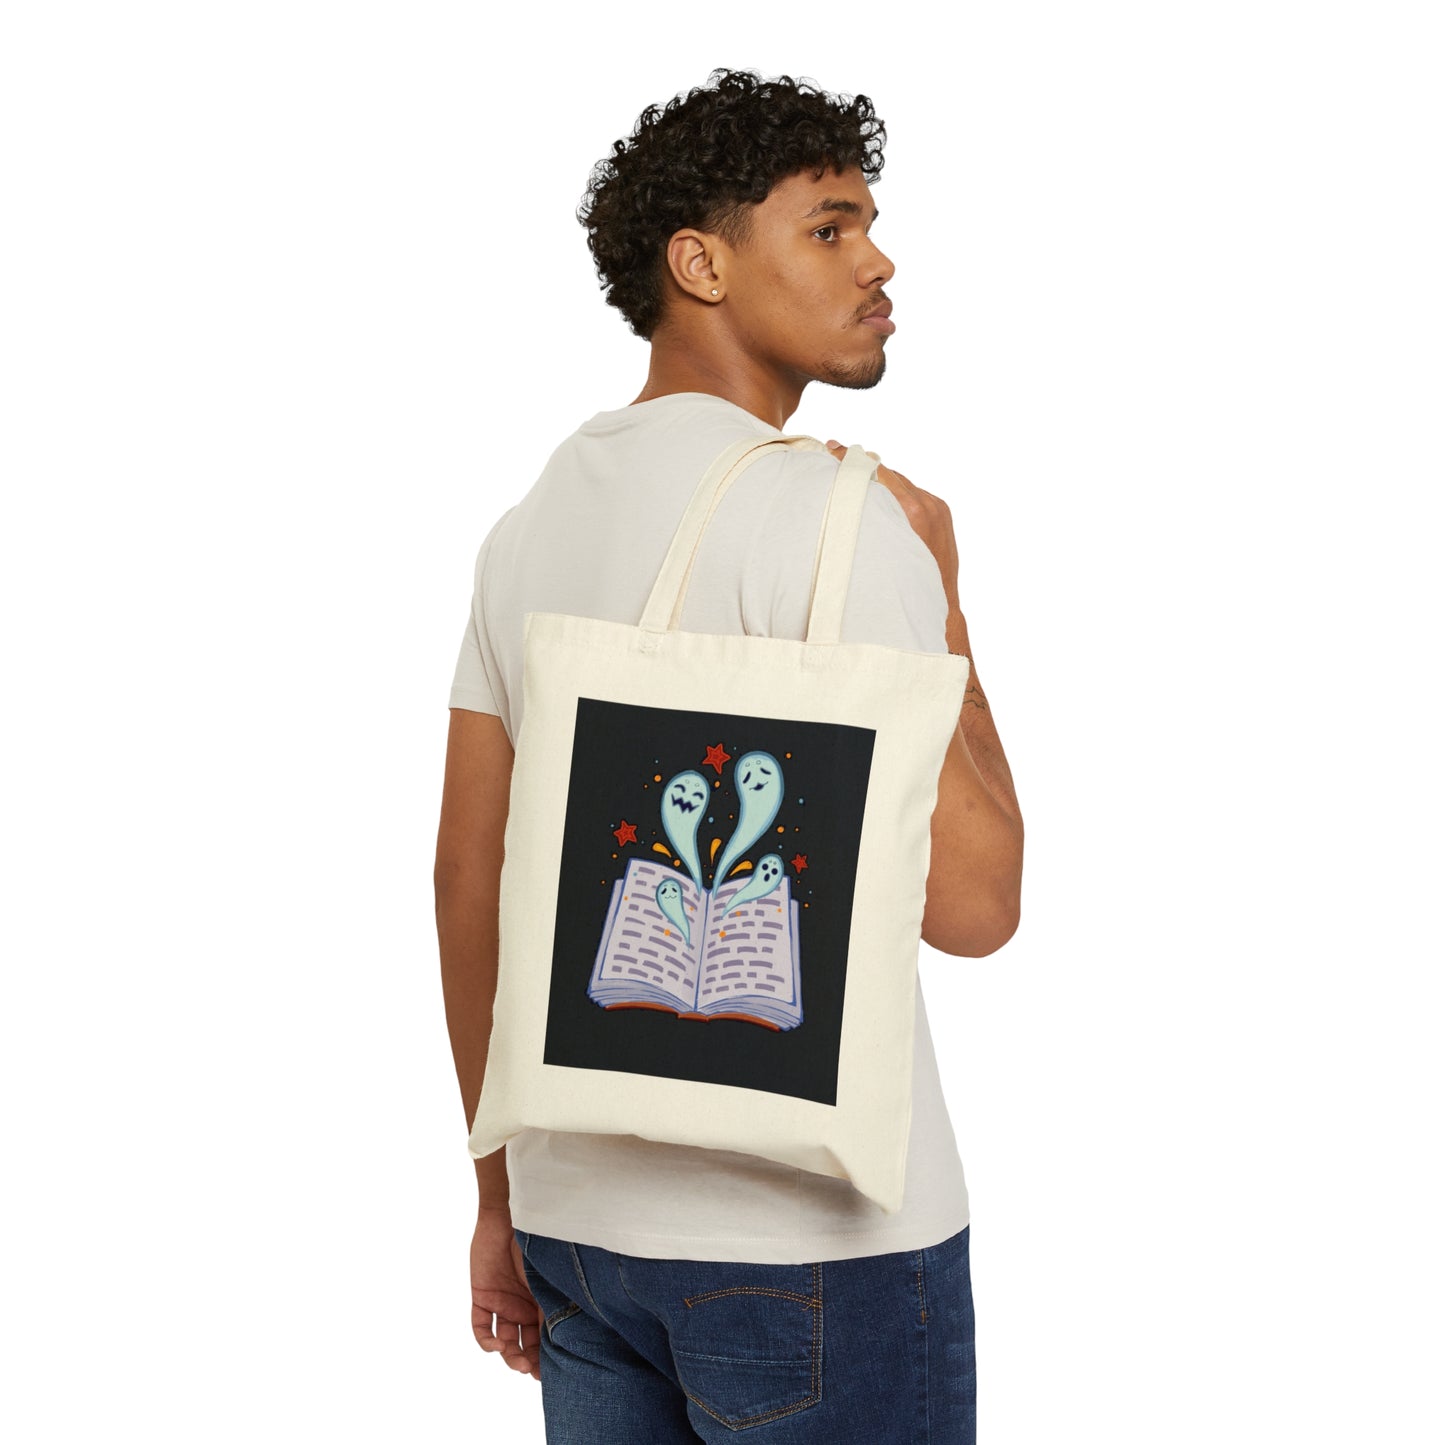 Keep St. Pete Lit "Boo Book" Cotton Canvas Tote Bag